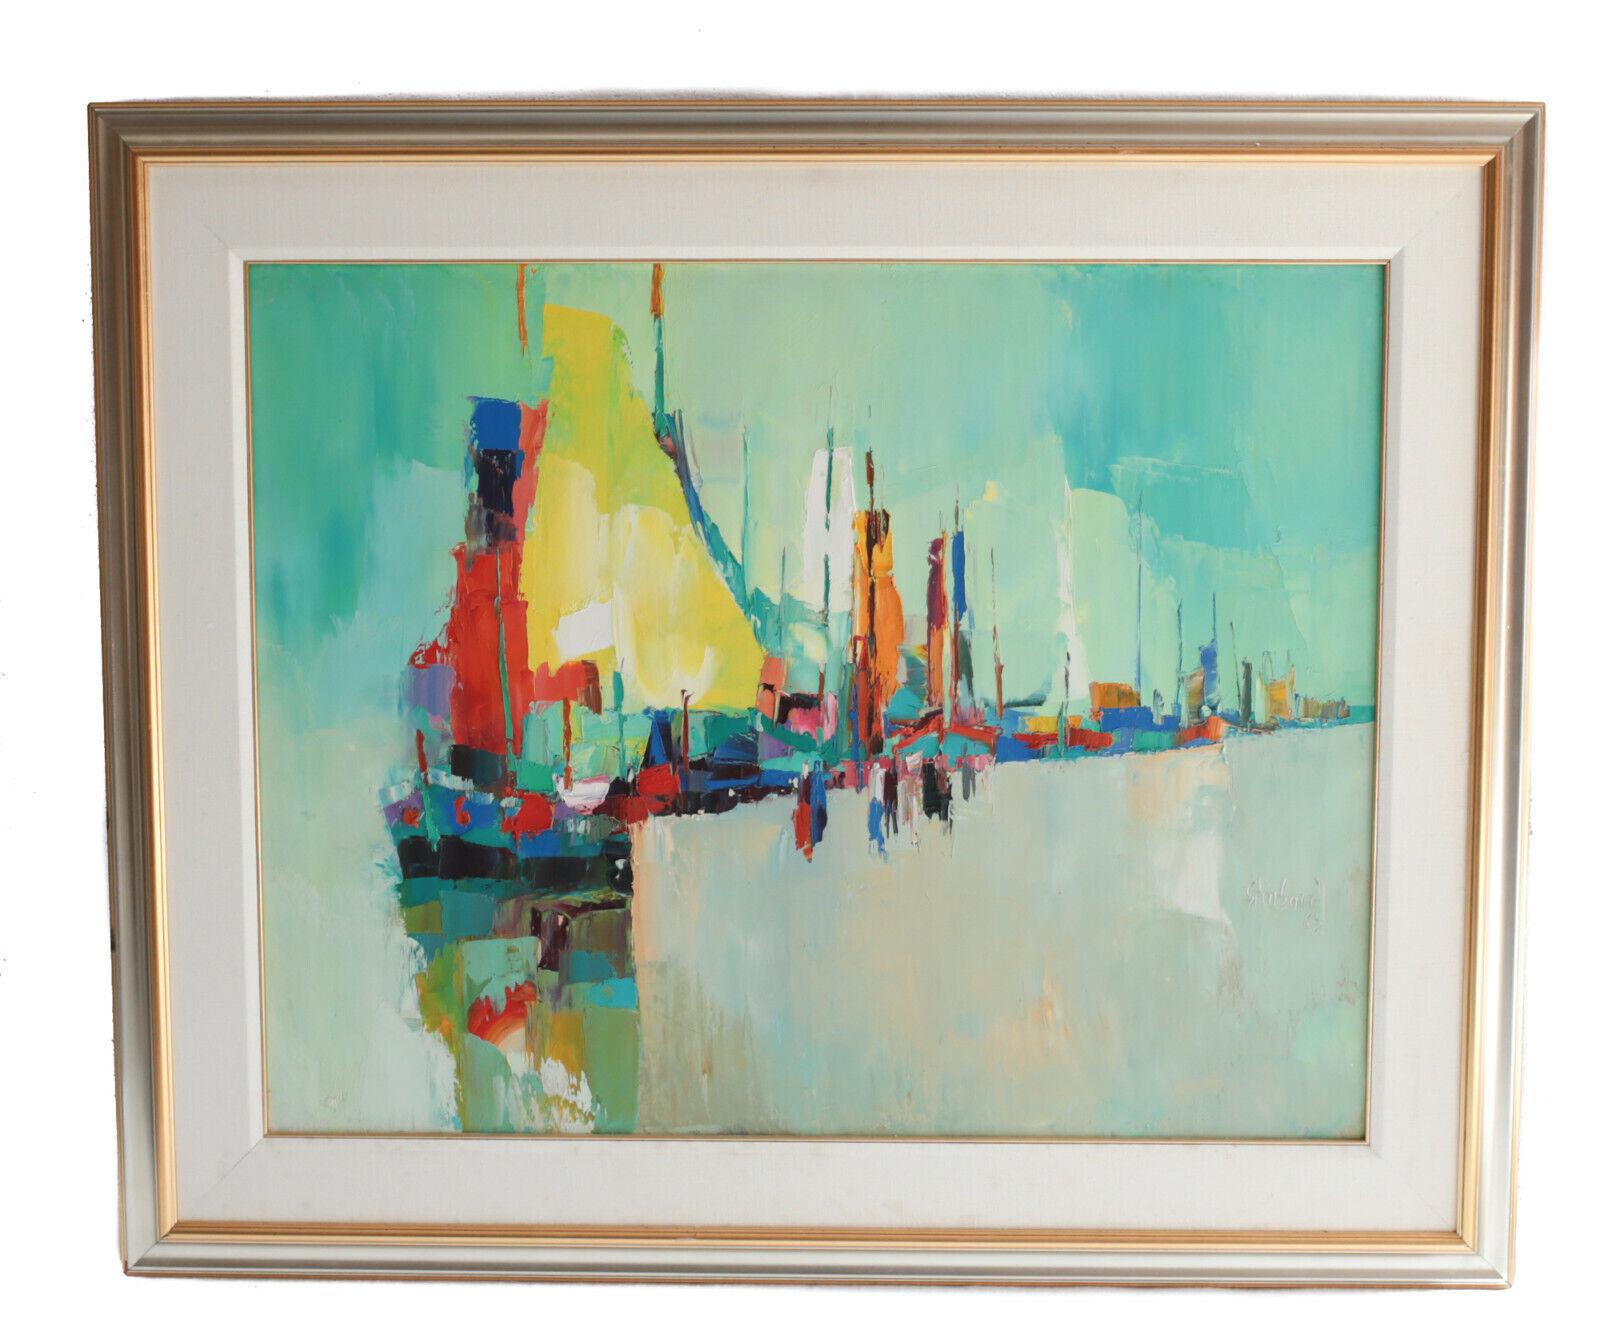 Nicola Simbari oil on canvas, green harbor, signed

The stunning Neo-Impressionism painting depicts a modernist abstract harbor. Signed Simbari to the right. Framed and matted in a gilt wood frame. The back states the painting was from DeBruyne